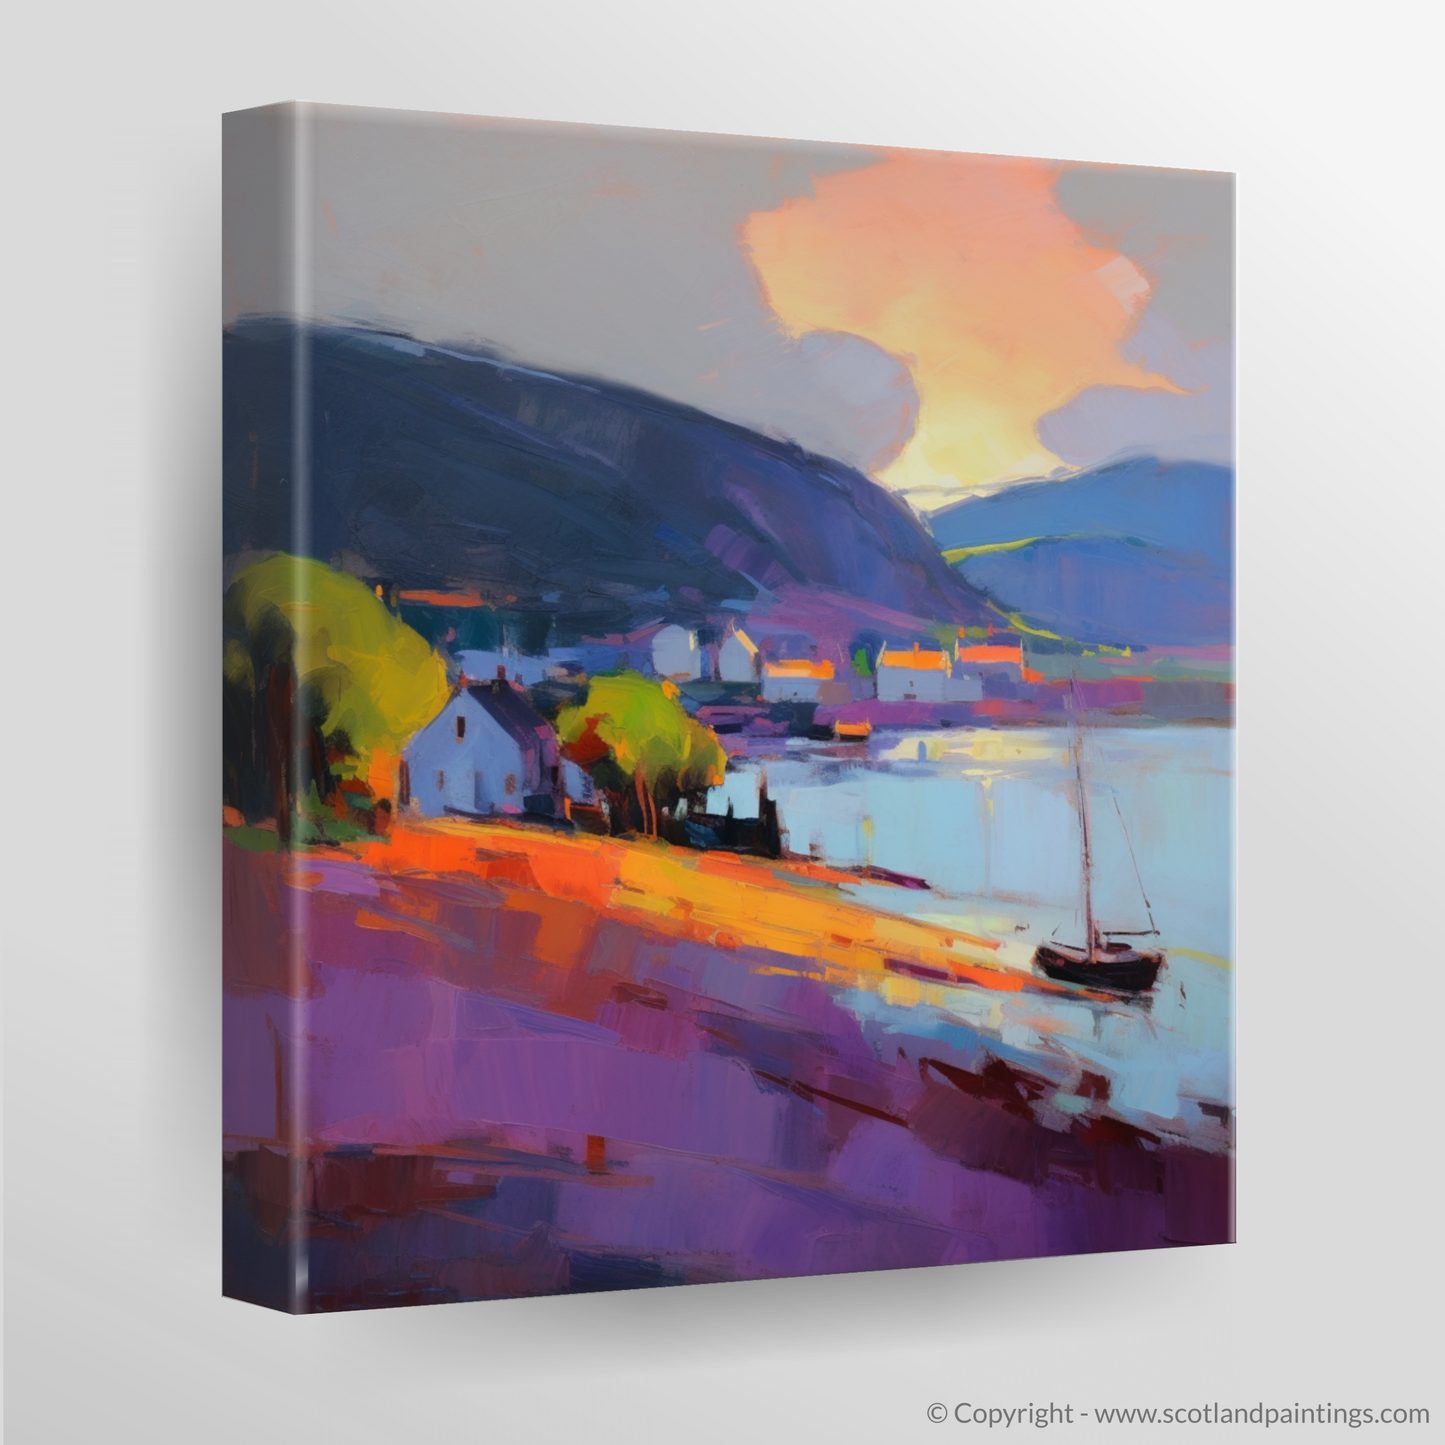 Cromarty Harbour at Dusk: An Expressionist Ode to Scottish Splendour